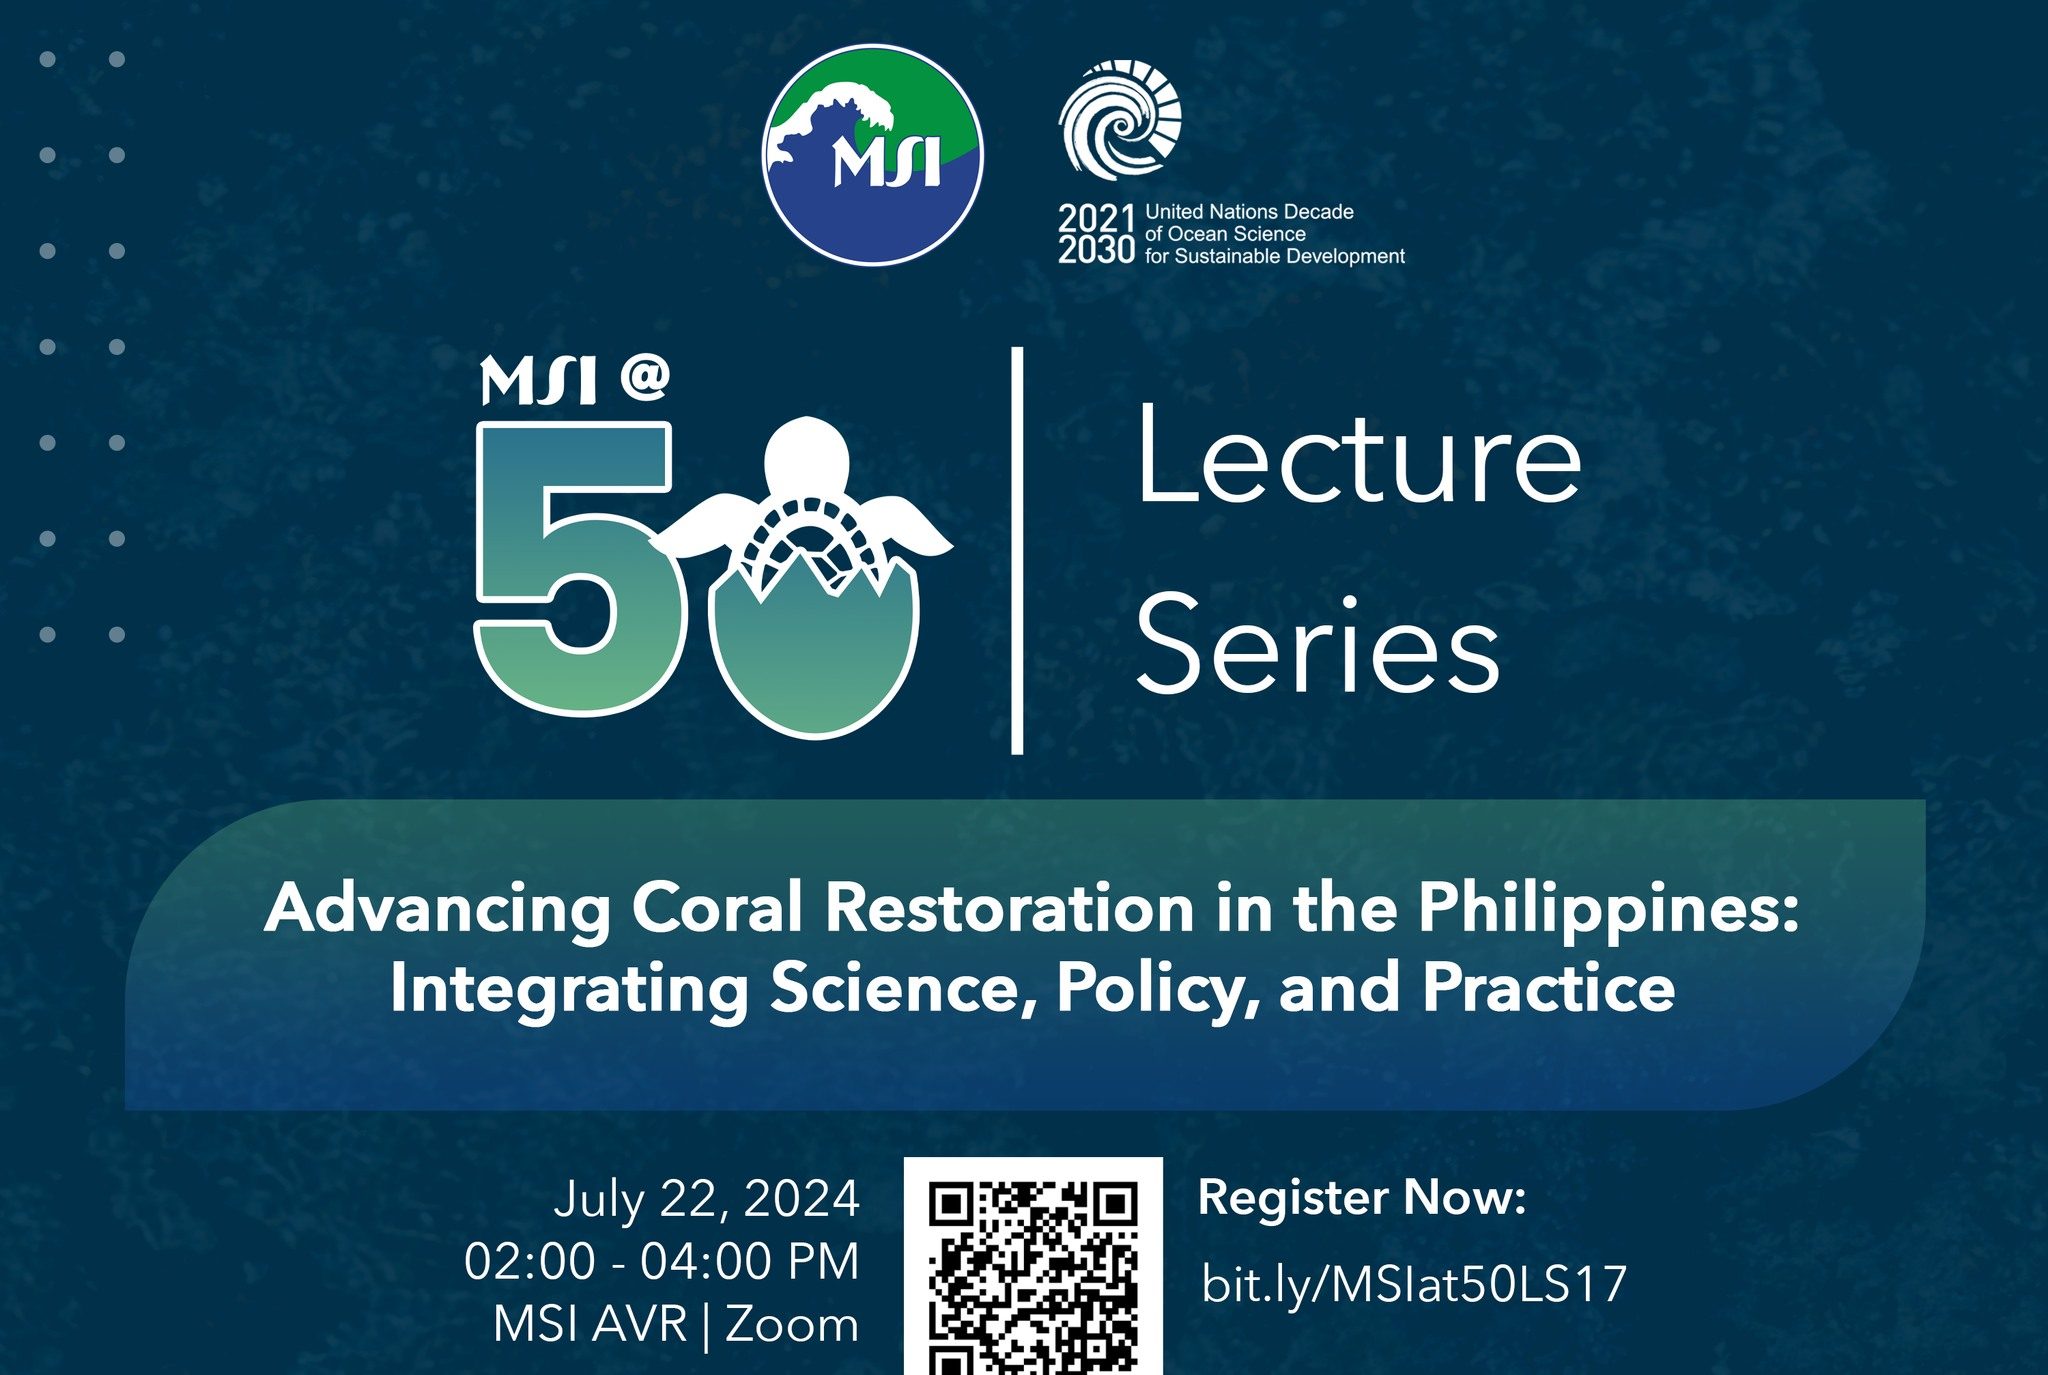 Advancing Coral Restoration in the Philippines: Integrating Science, Policy, and Practice